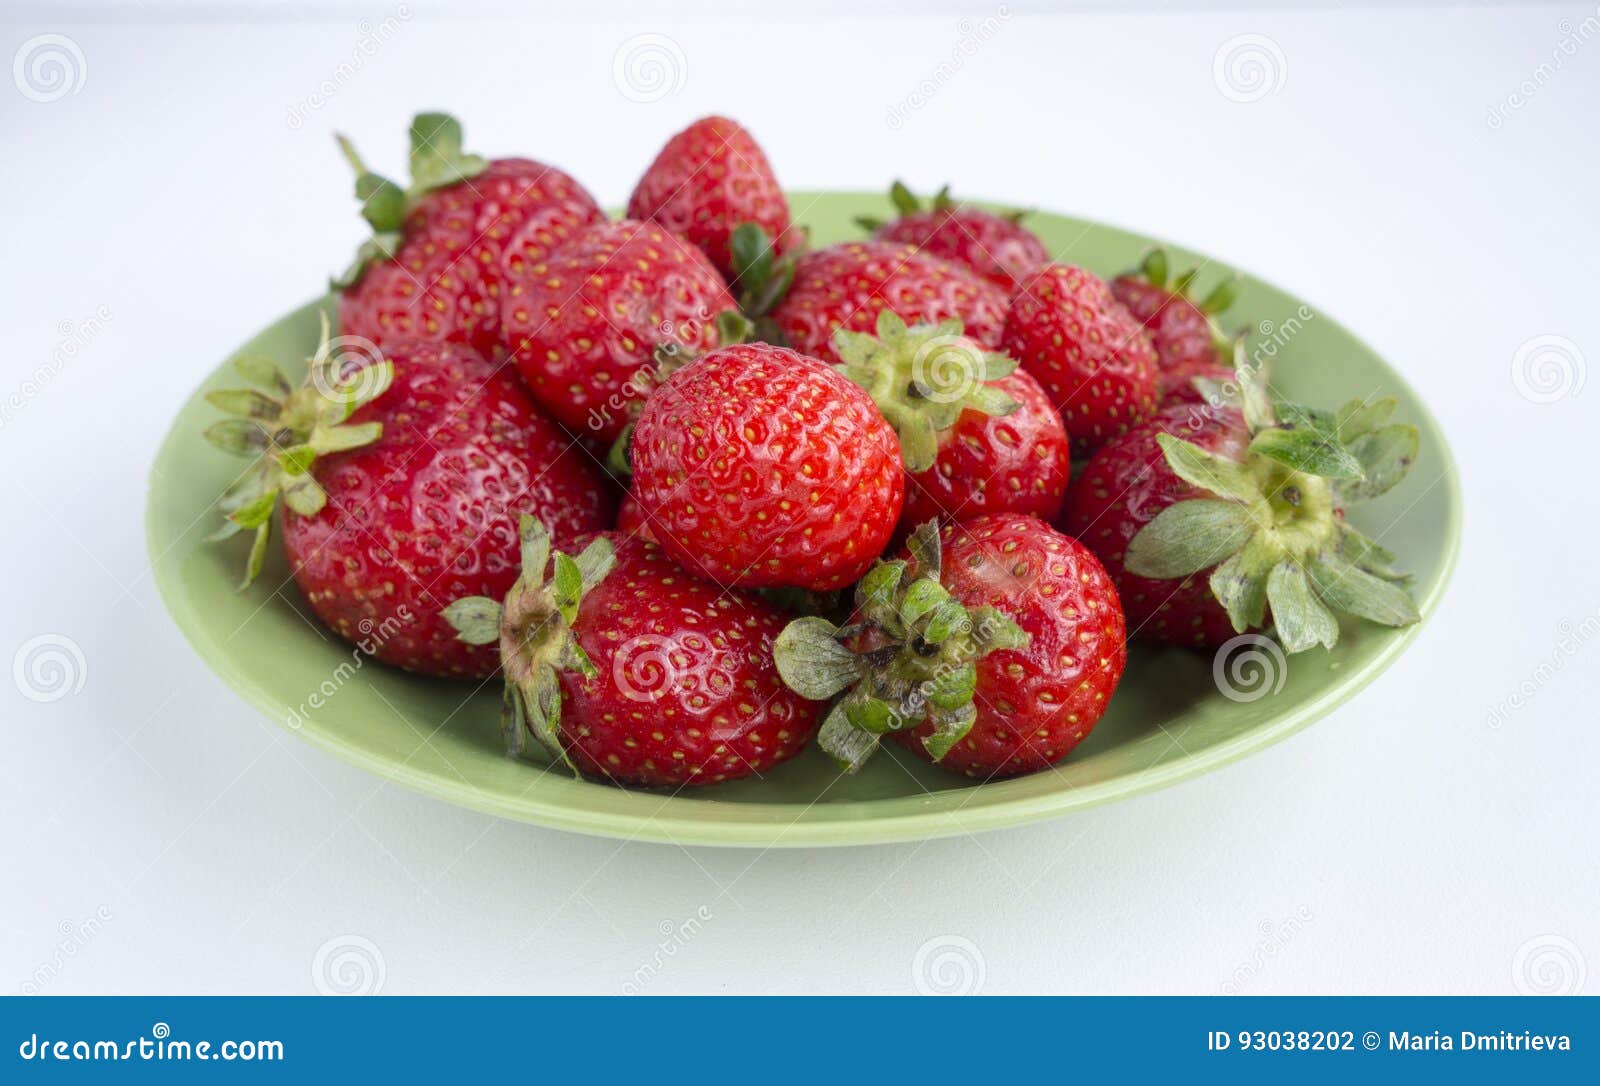 Strawberries on a plate. Strawberries on a green plate; closeup